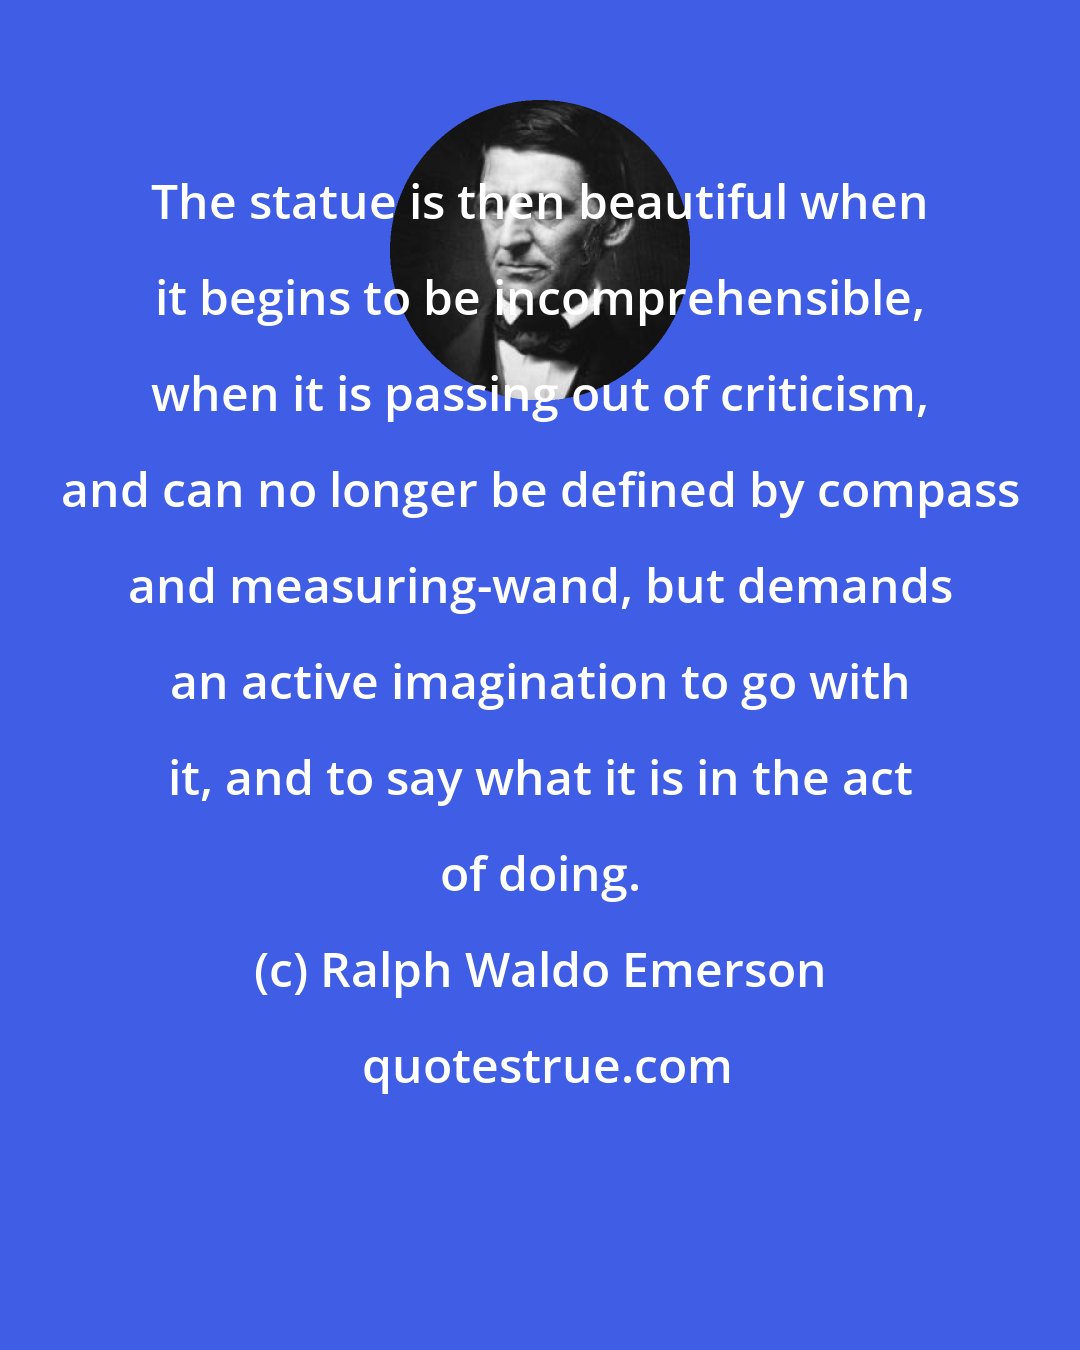 Ralph Waldo Emerson: The statue is then beautiful when it begins to be incomprehensible, when it is passing out of criticism, and can no longer be defined by compass and measuring-wand, but demands an active imagination to go with it, and to say what it is in the act of doing.